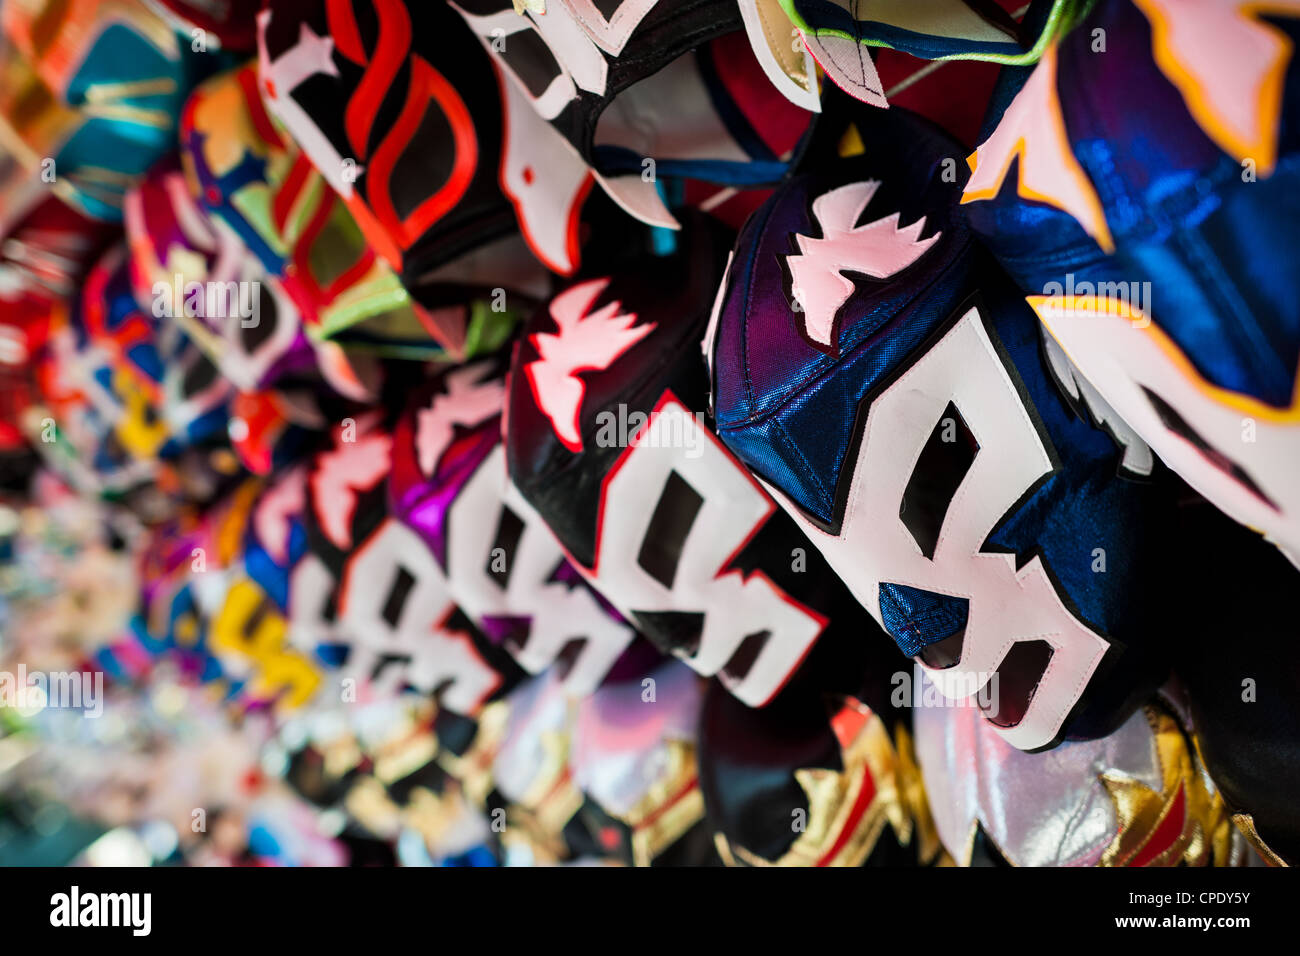 Colorful Lucha libre (Mexican wrestling) masks for sale in a street shop in Mexico City, Mexico. Stock Photo